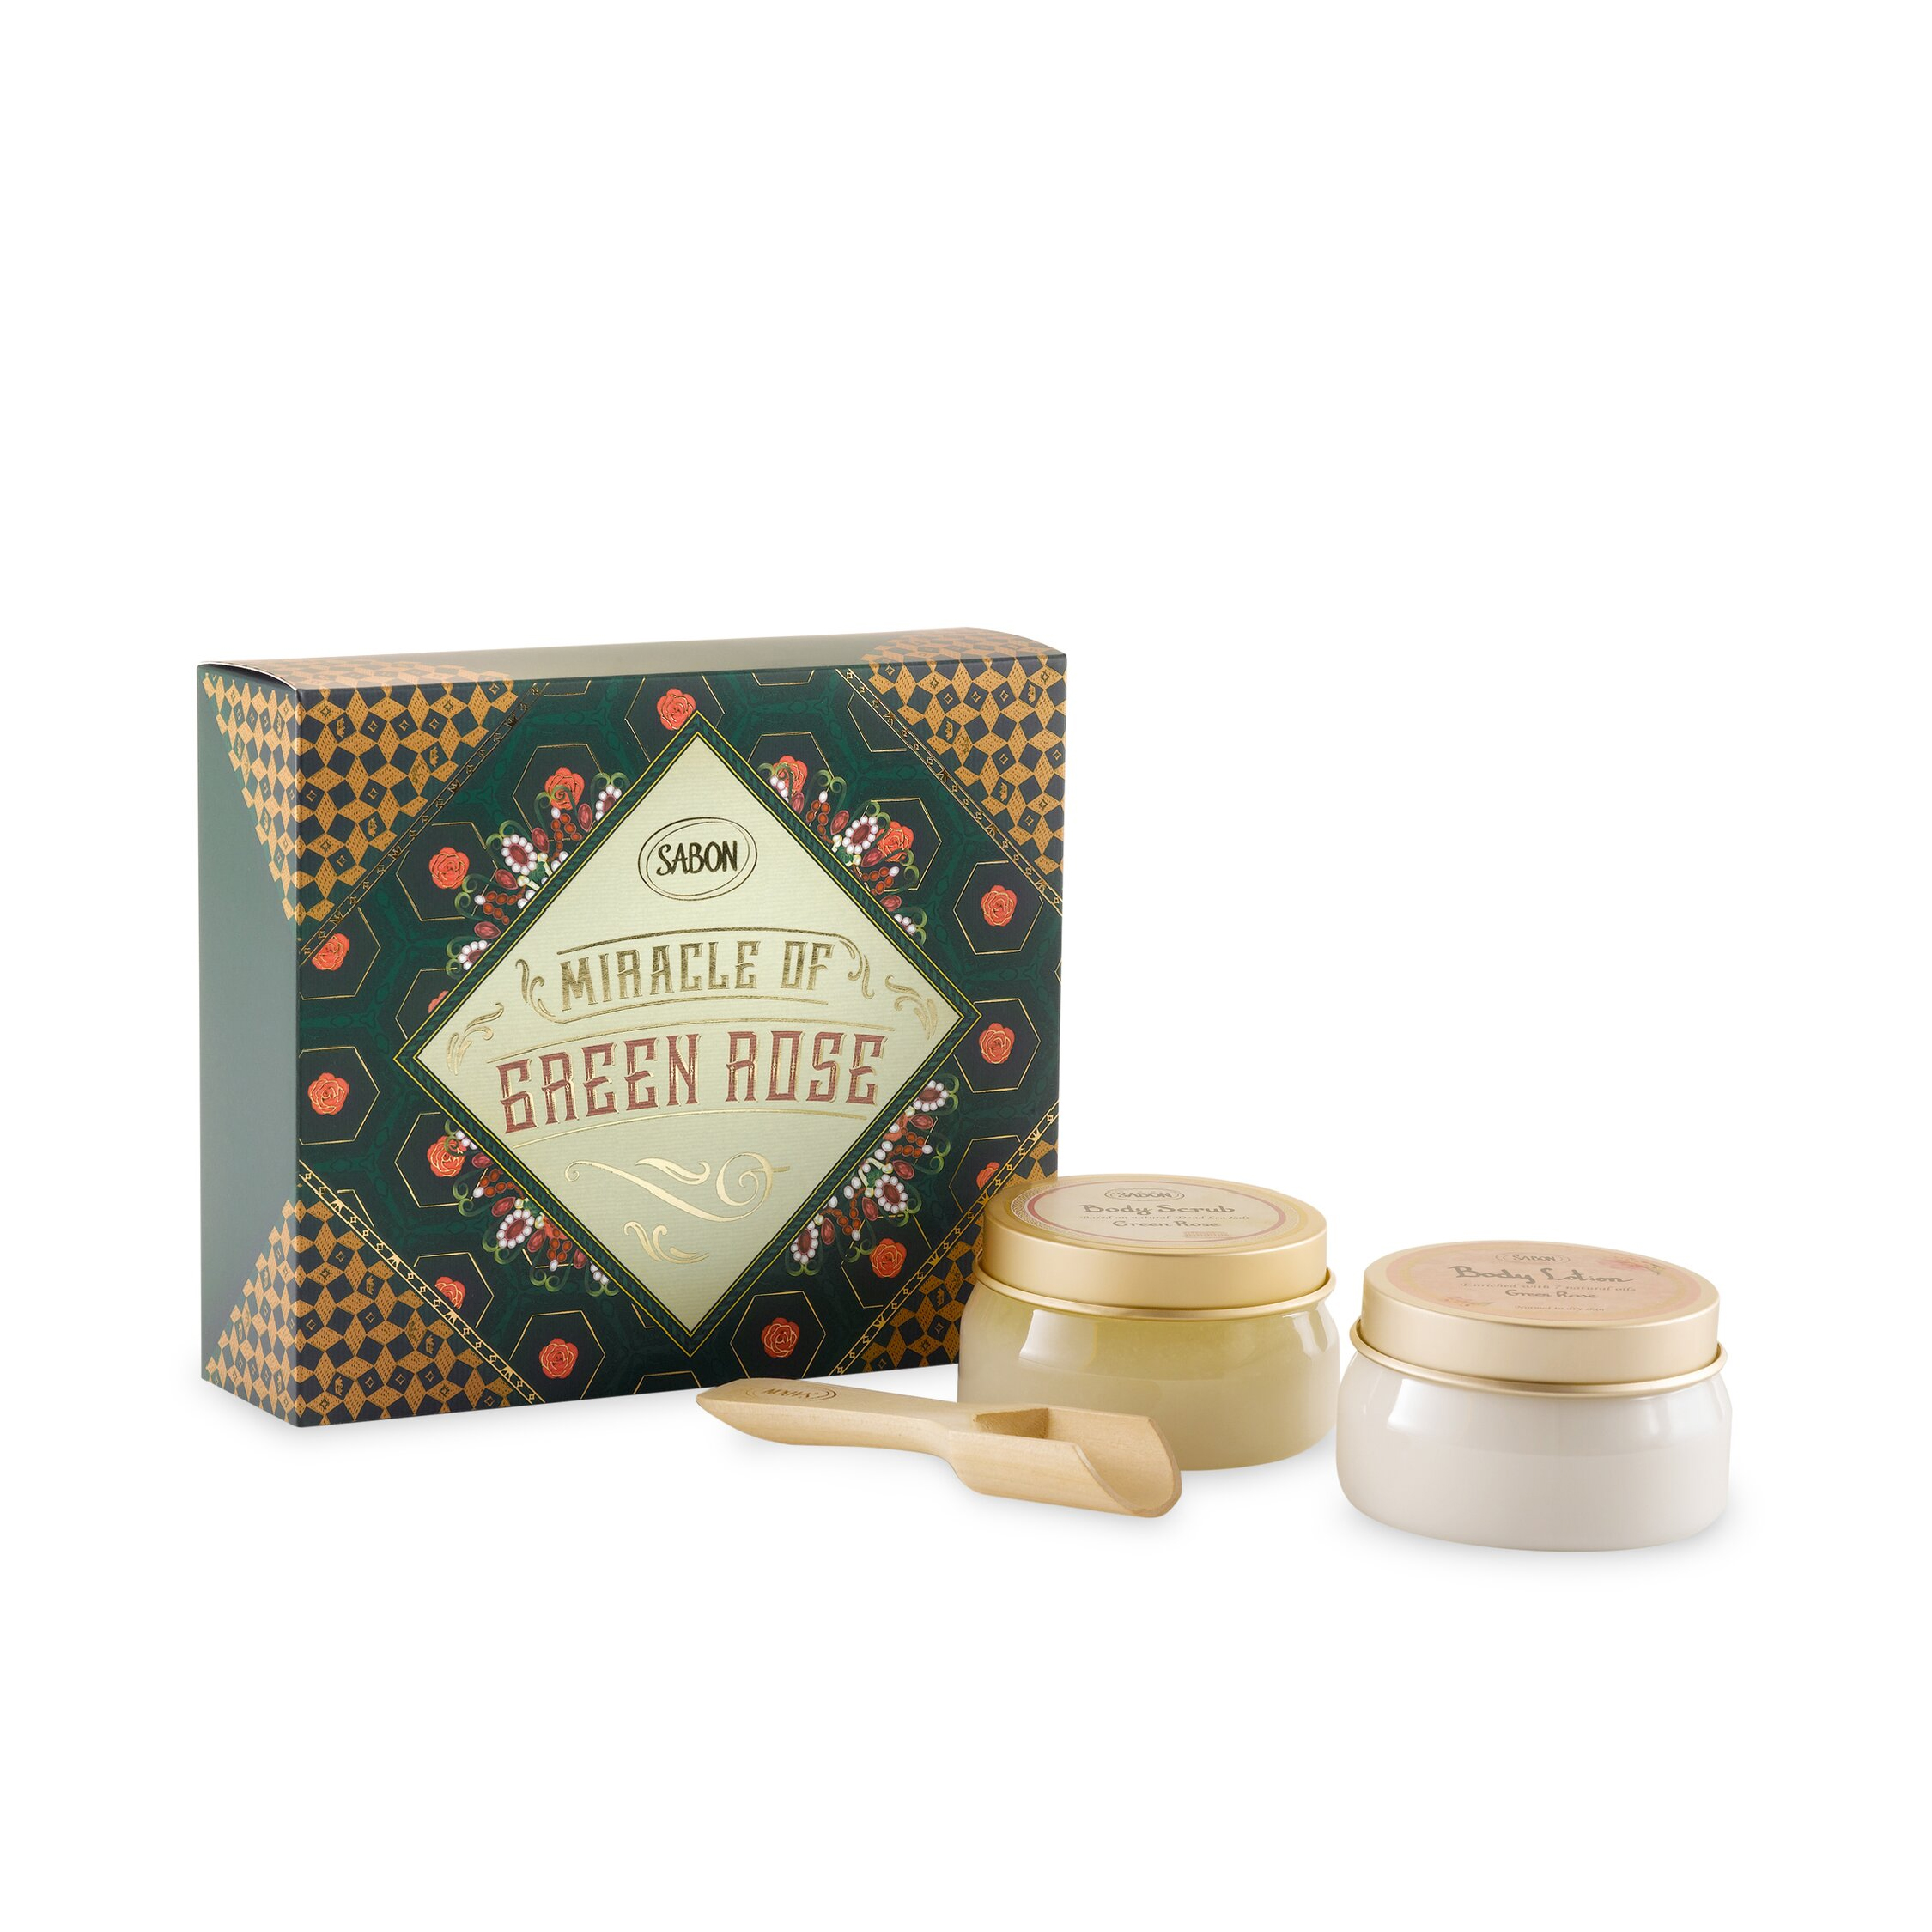 SABON MIRACLE OF GREEN ROSE ( BODY LOTION / BODY SCRUB / WOODEN SPOON )